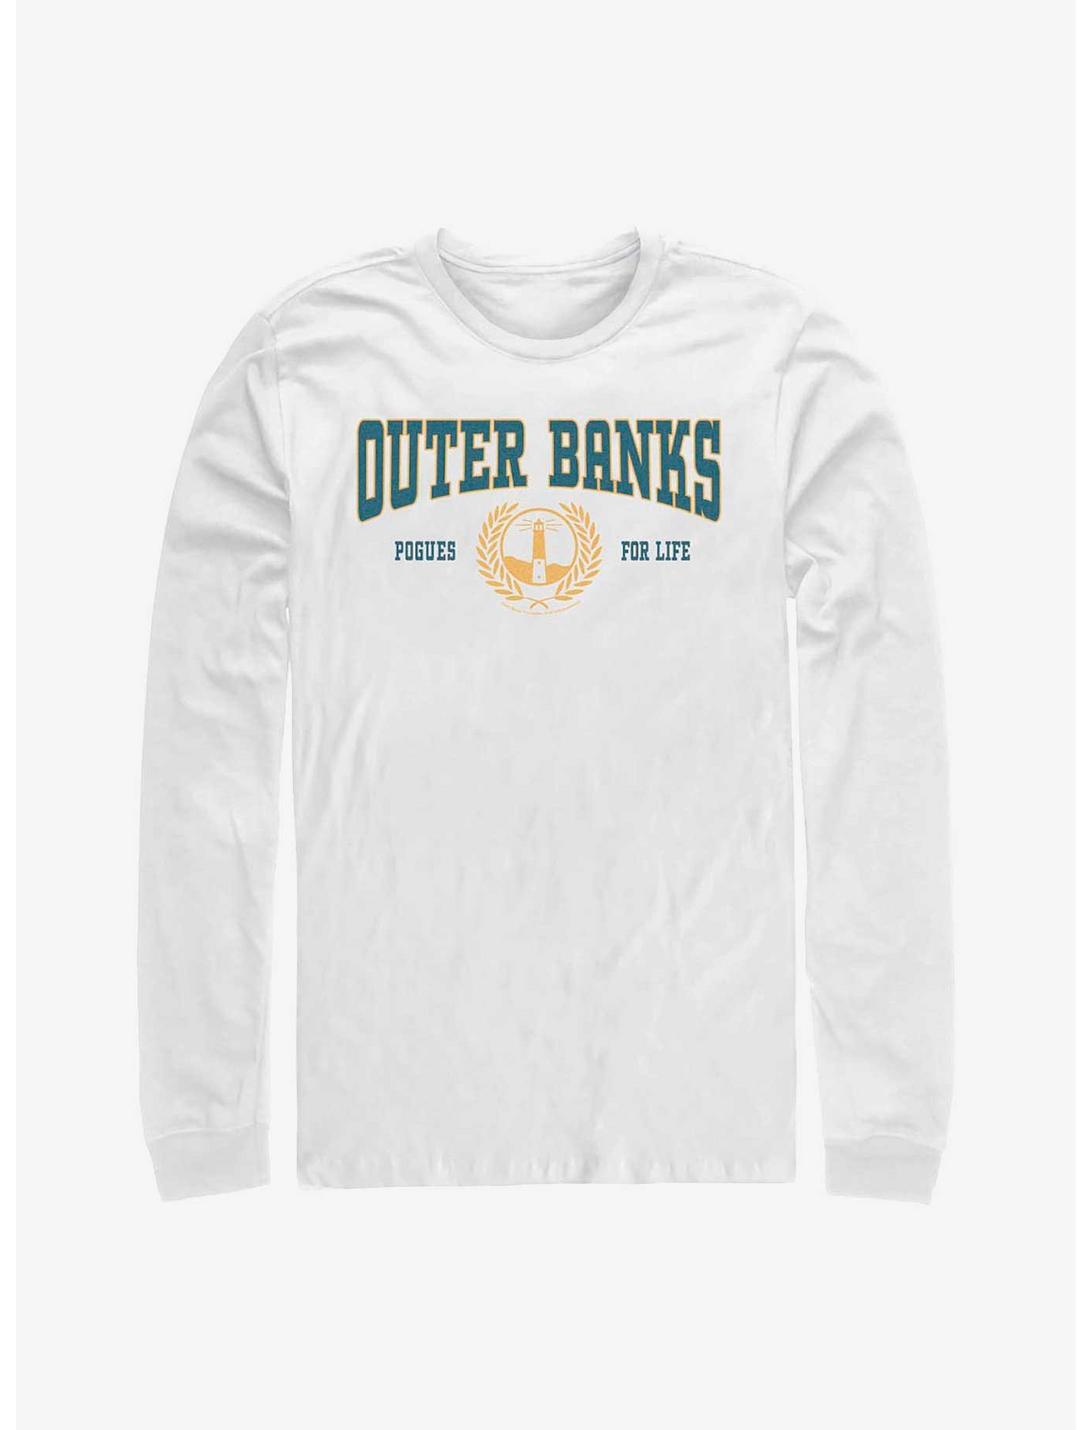 Outer Banks Collegiate Long-Sleeve T-Shirt, WHITE, hi-res